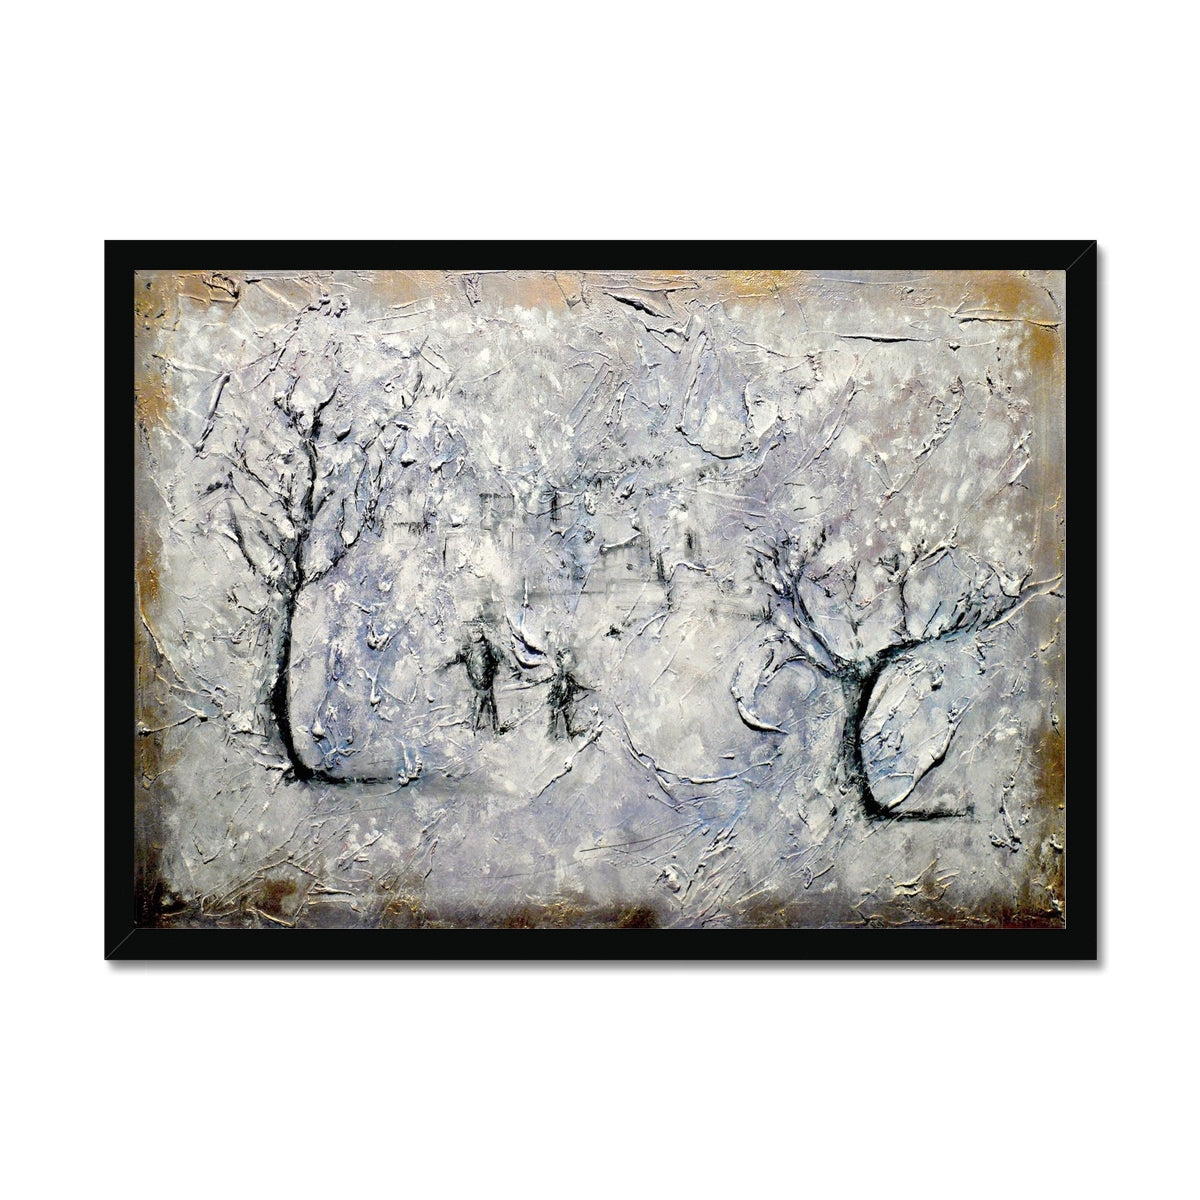 Father Daughter Snow Painting | Framed Prints From Scotland-Framed Prints-Abstract & Impressionistic Art Gallery-A2 Landscape-Black Frame-Paintings, Prints, Homeware, Art Gifts From Scotland By Scottish Artist Kevin Hunter